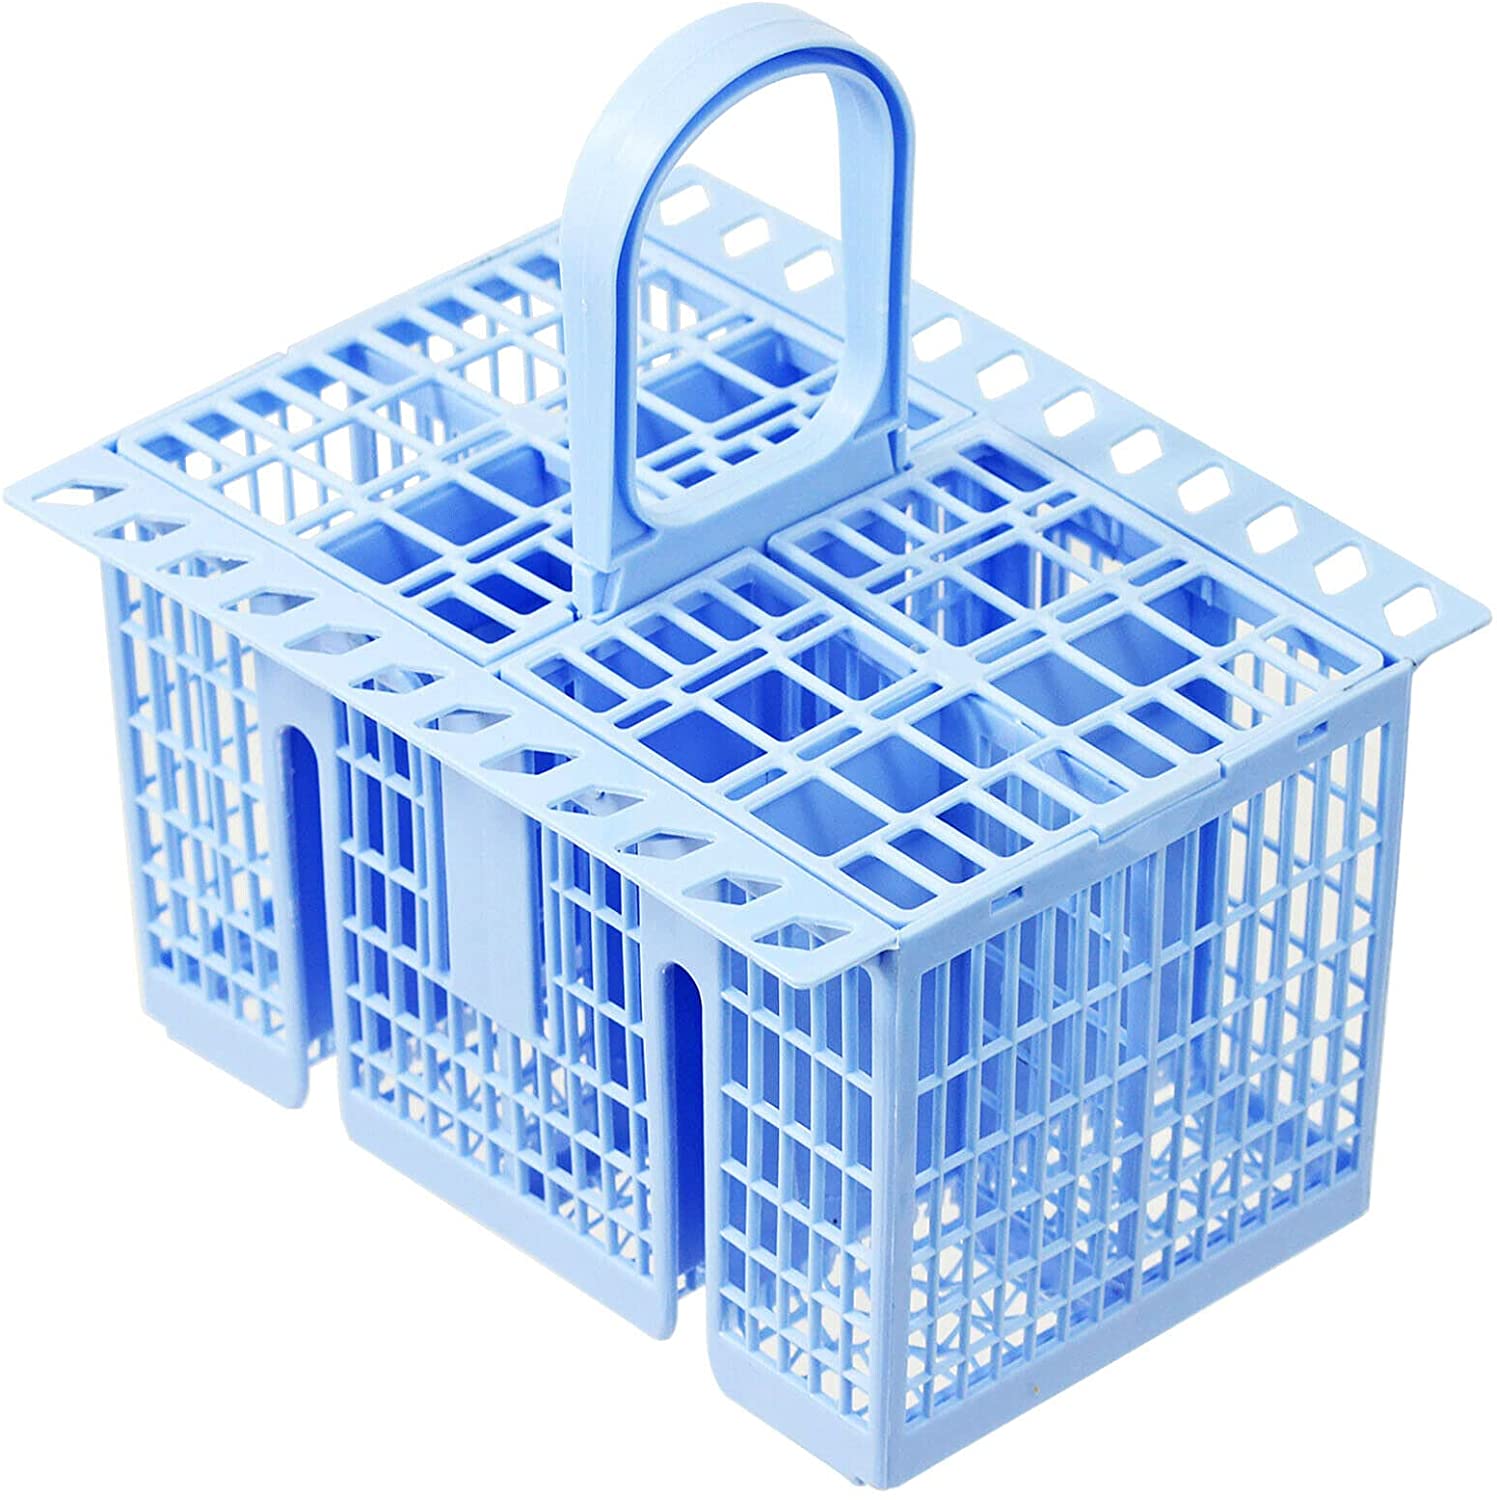 SPARES2GO Cutlery Basket compatible with Bauknecht Dishwasher (Blue, 220 x 208 x 160mm)